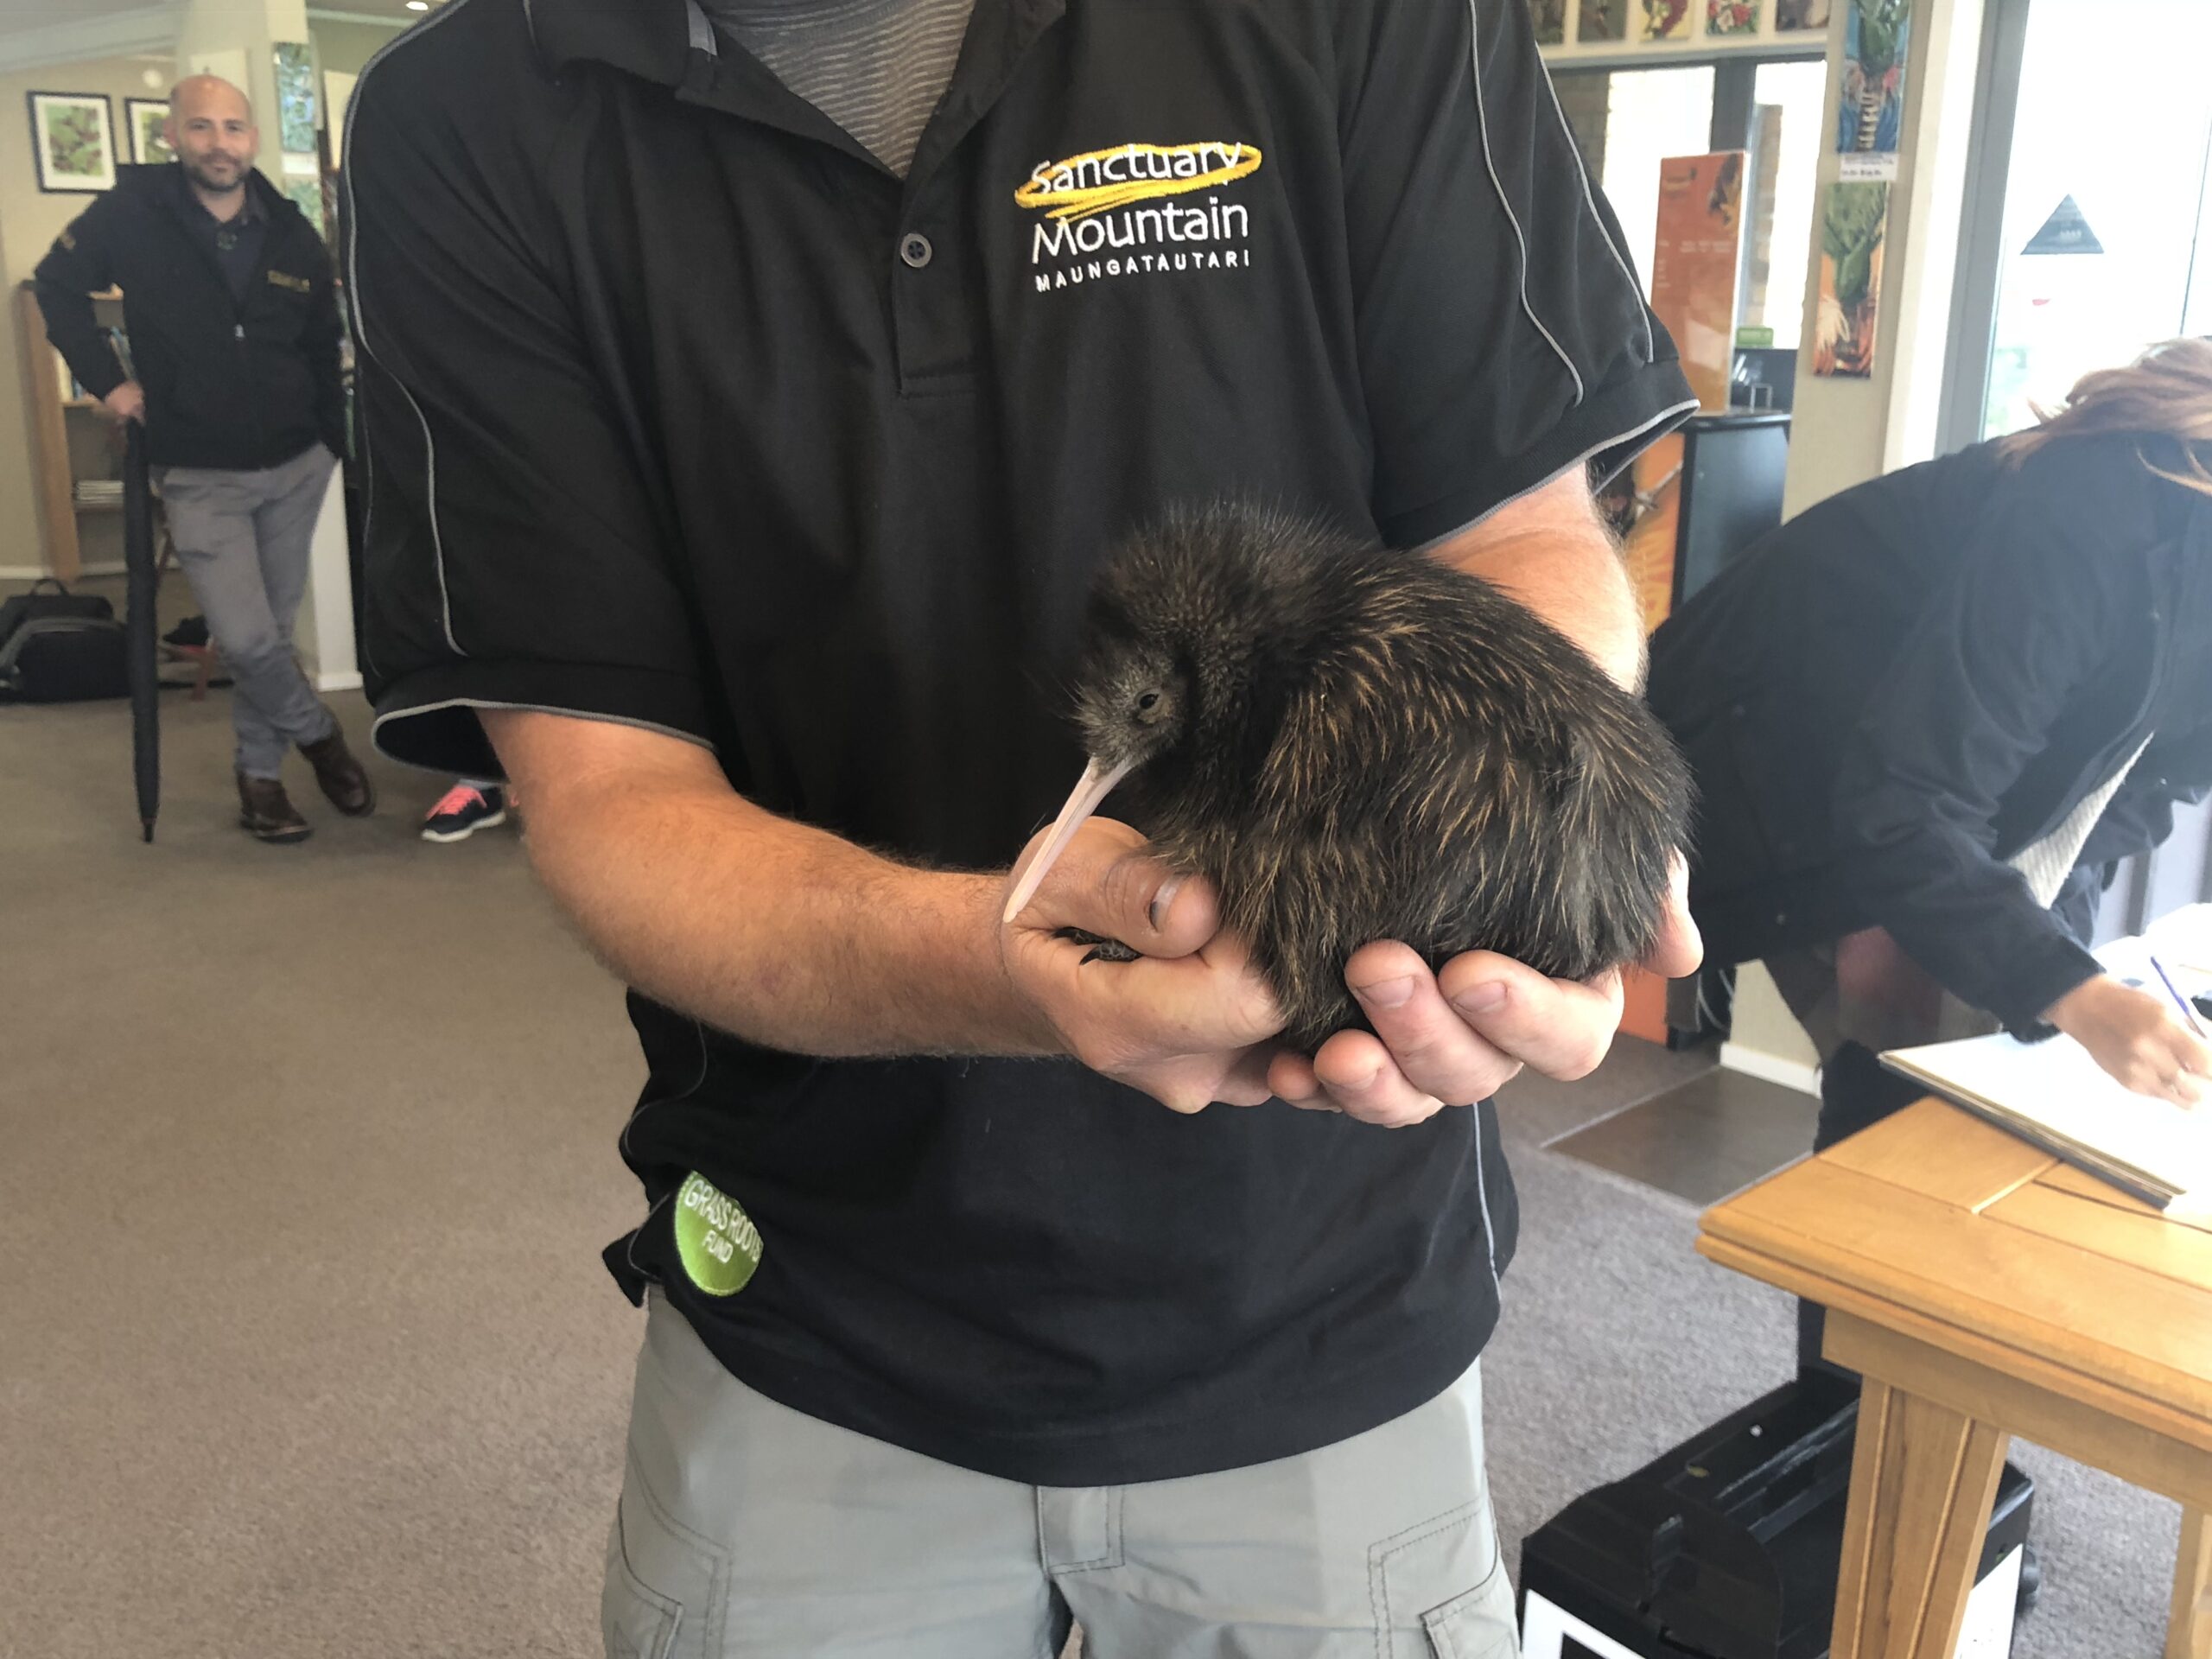 Juvenile kiwi being held by Sanctuary Mountain staff.